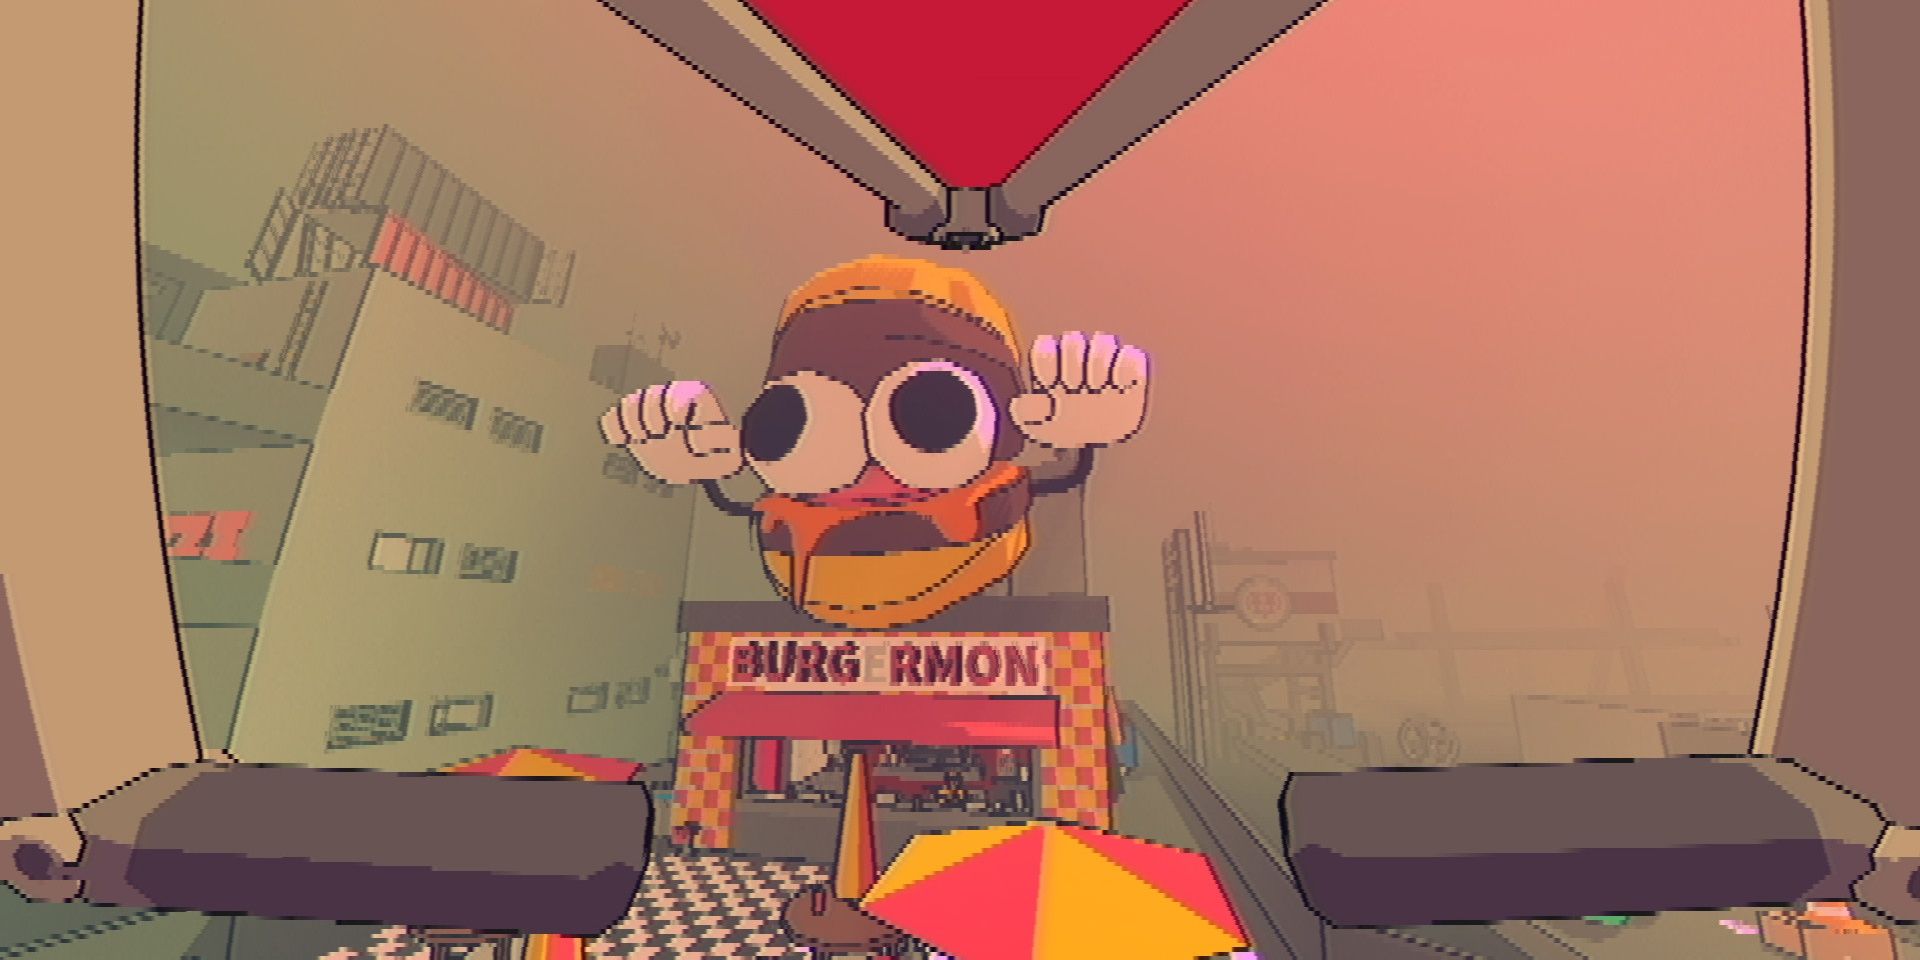 A first-person perspective of someone gliding into a burger joint called "Burgermon." A giant hamburger with eyeballs, arms, and oozing sauce sits on top of the building in Sludge Life